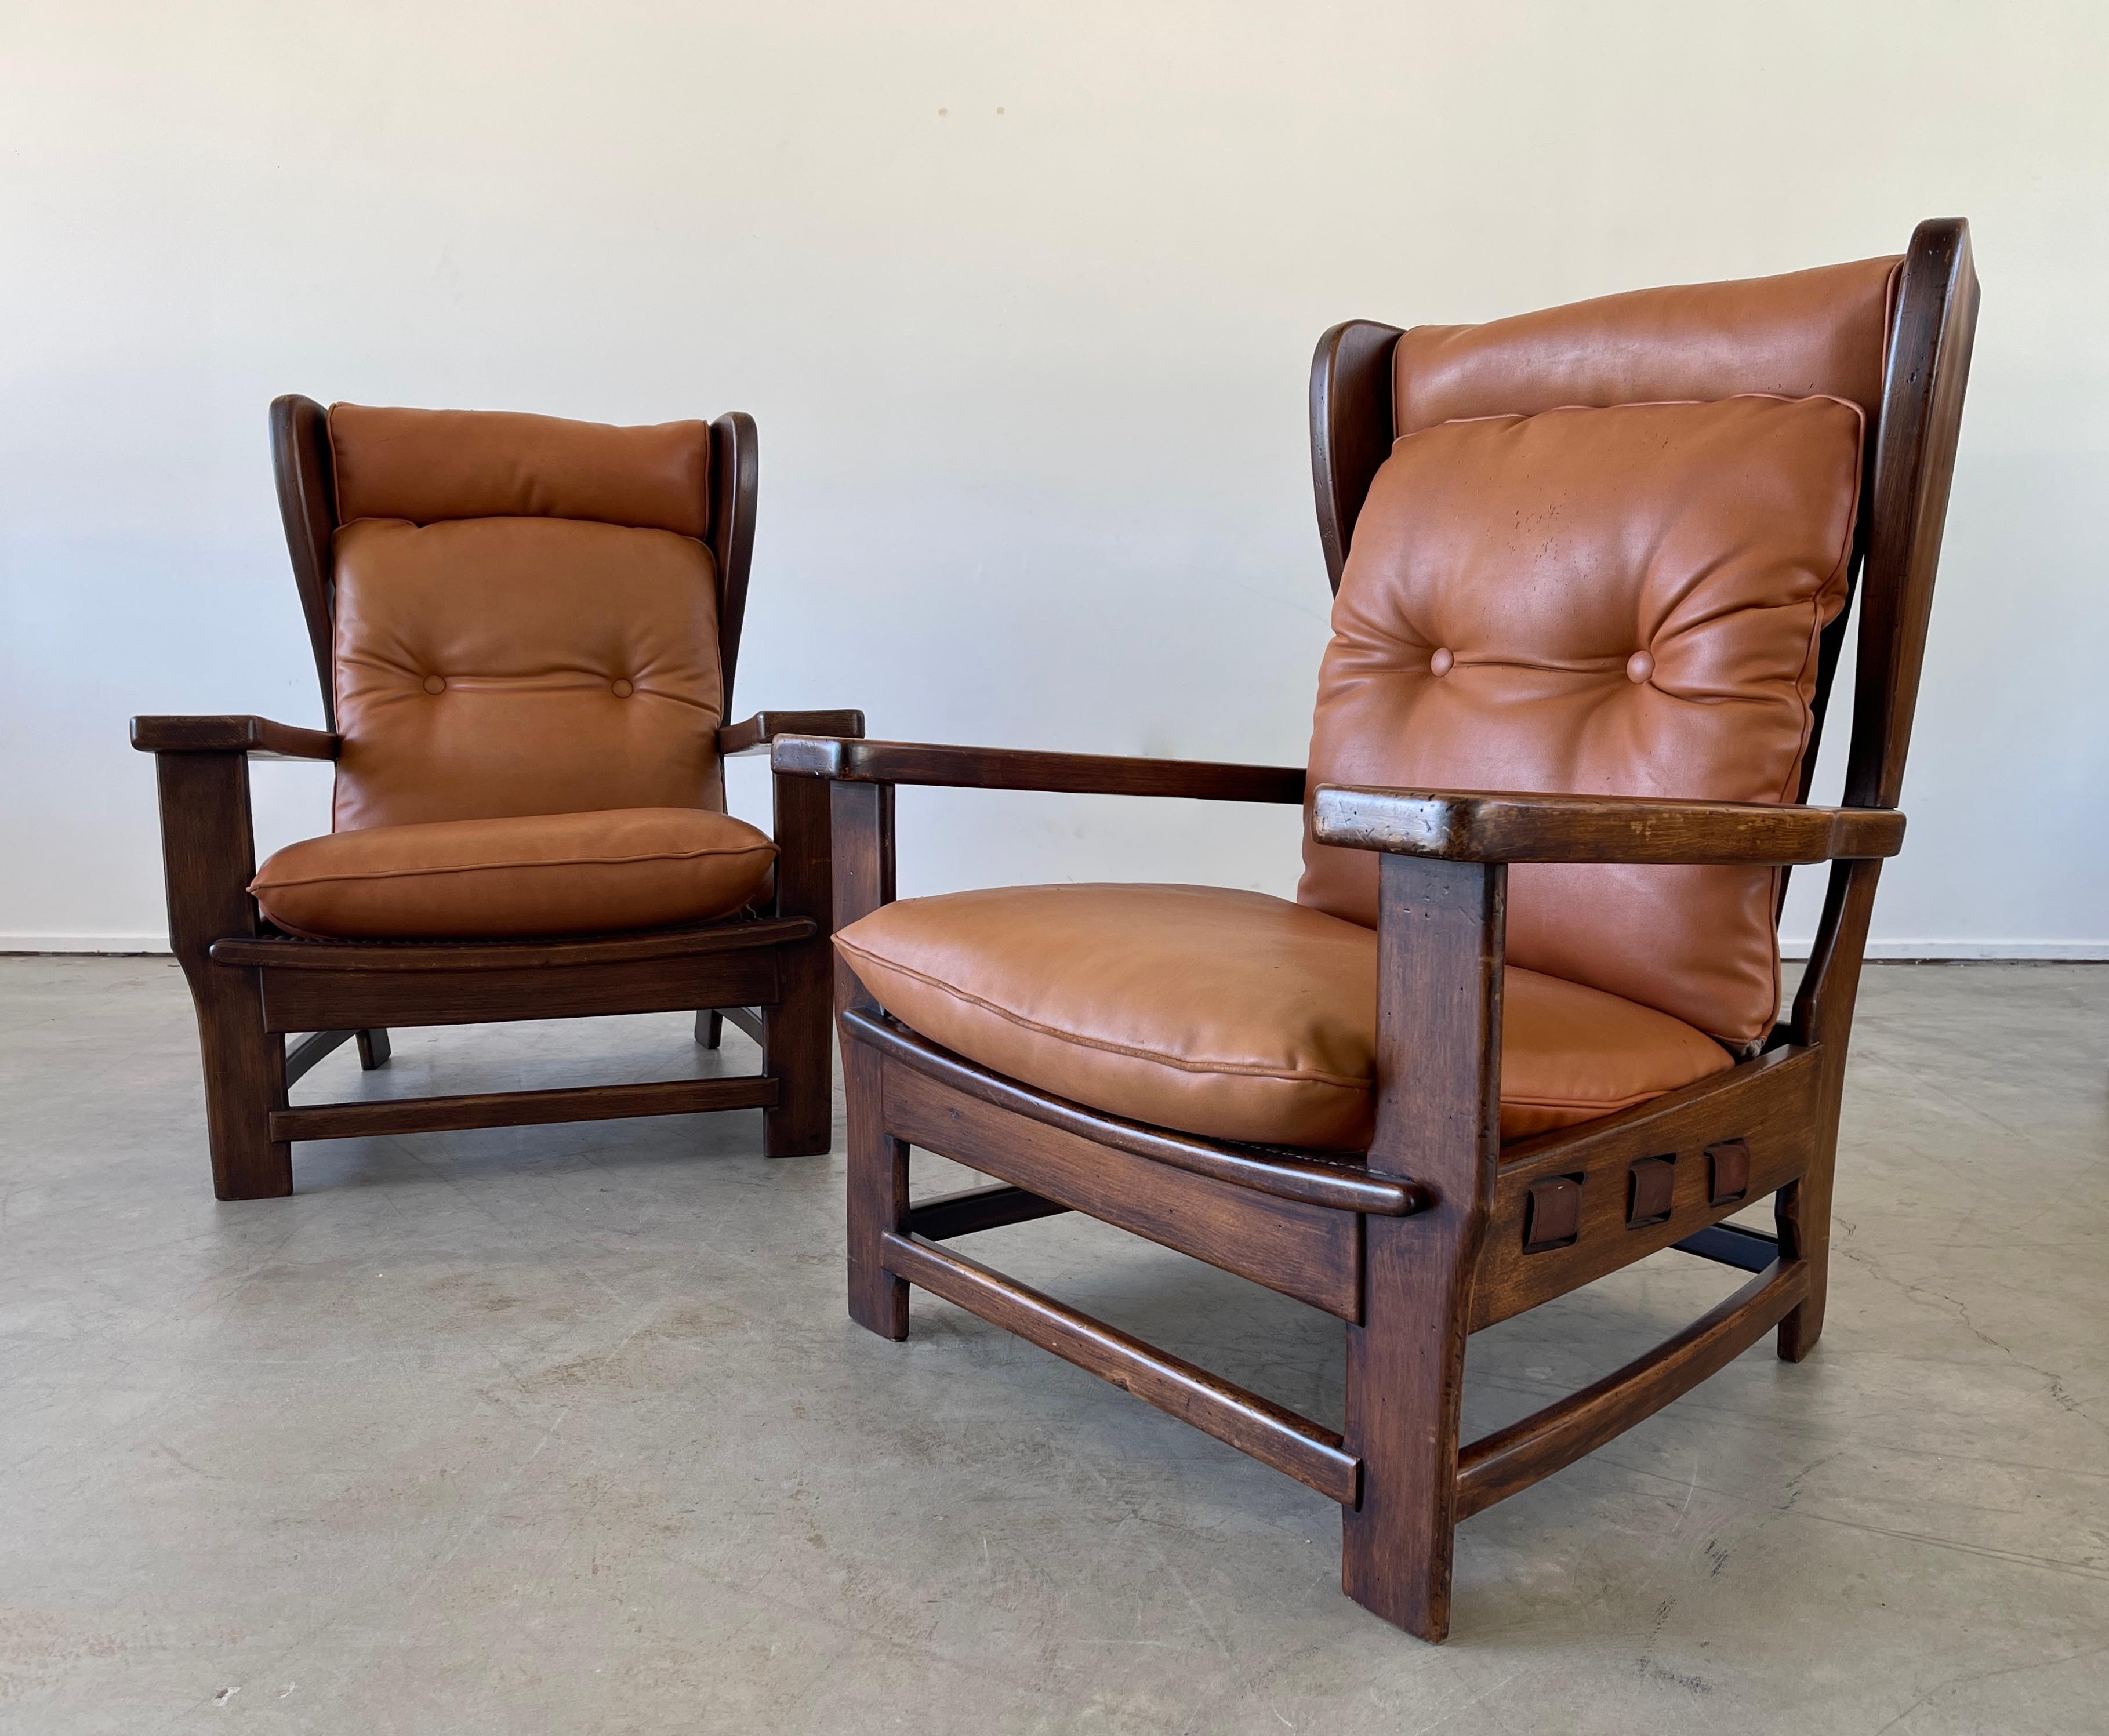 Unique pair of Swedish wingback chairs with walnut frame and original leather cushions and woven strap detail. 
Wonderful curved wingback shape - and warm patina to wood.